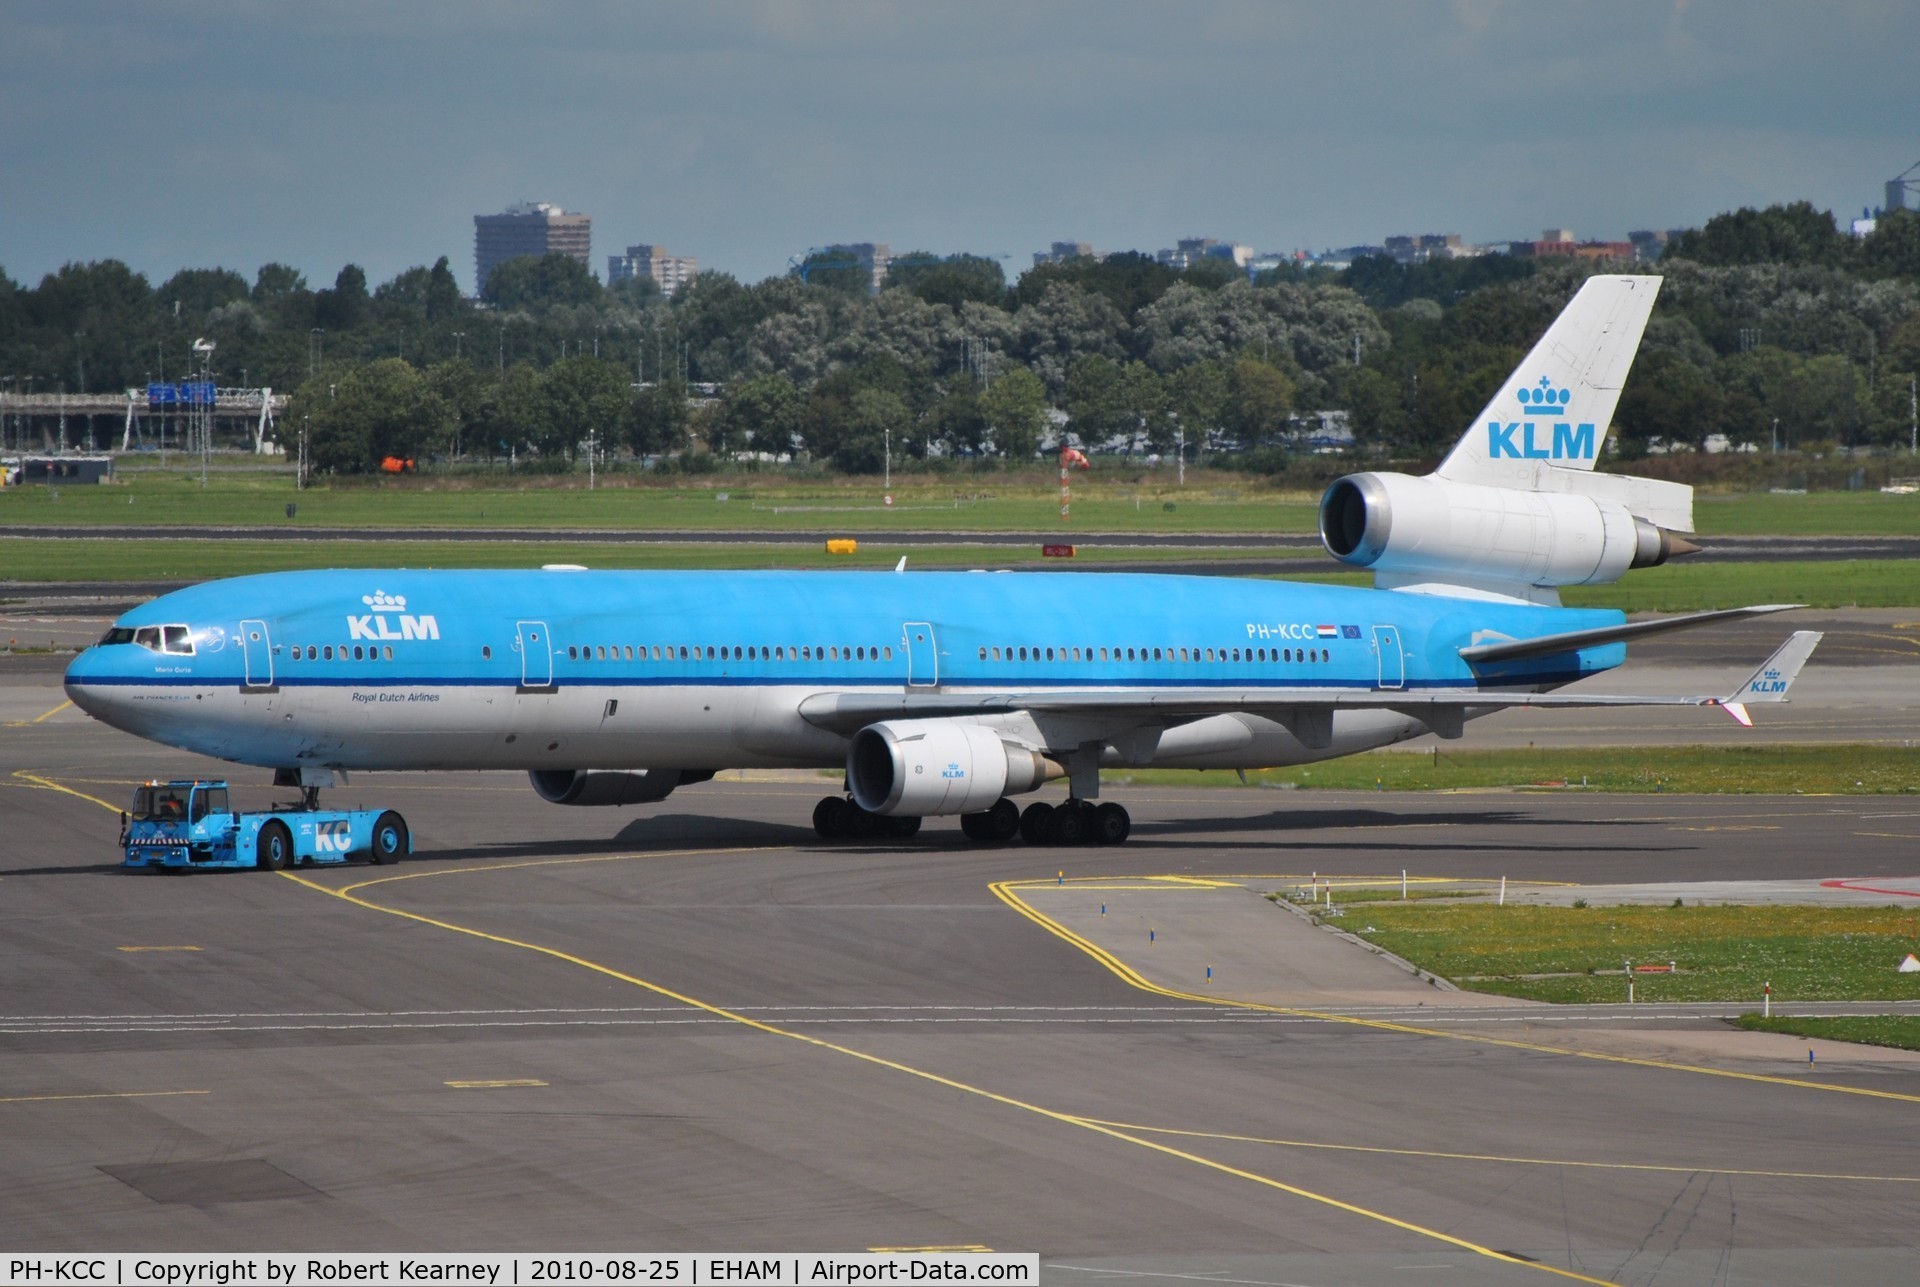 PH-KCC, 1994 McDonnell Douglas MD-11 C/N 48557, KLM heavy on tow to parking